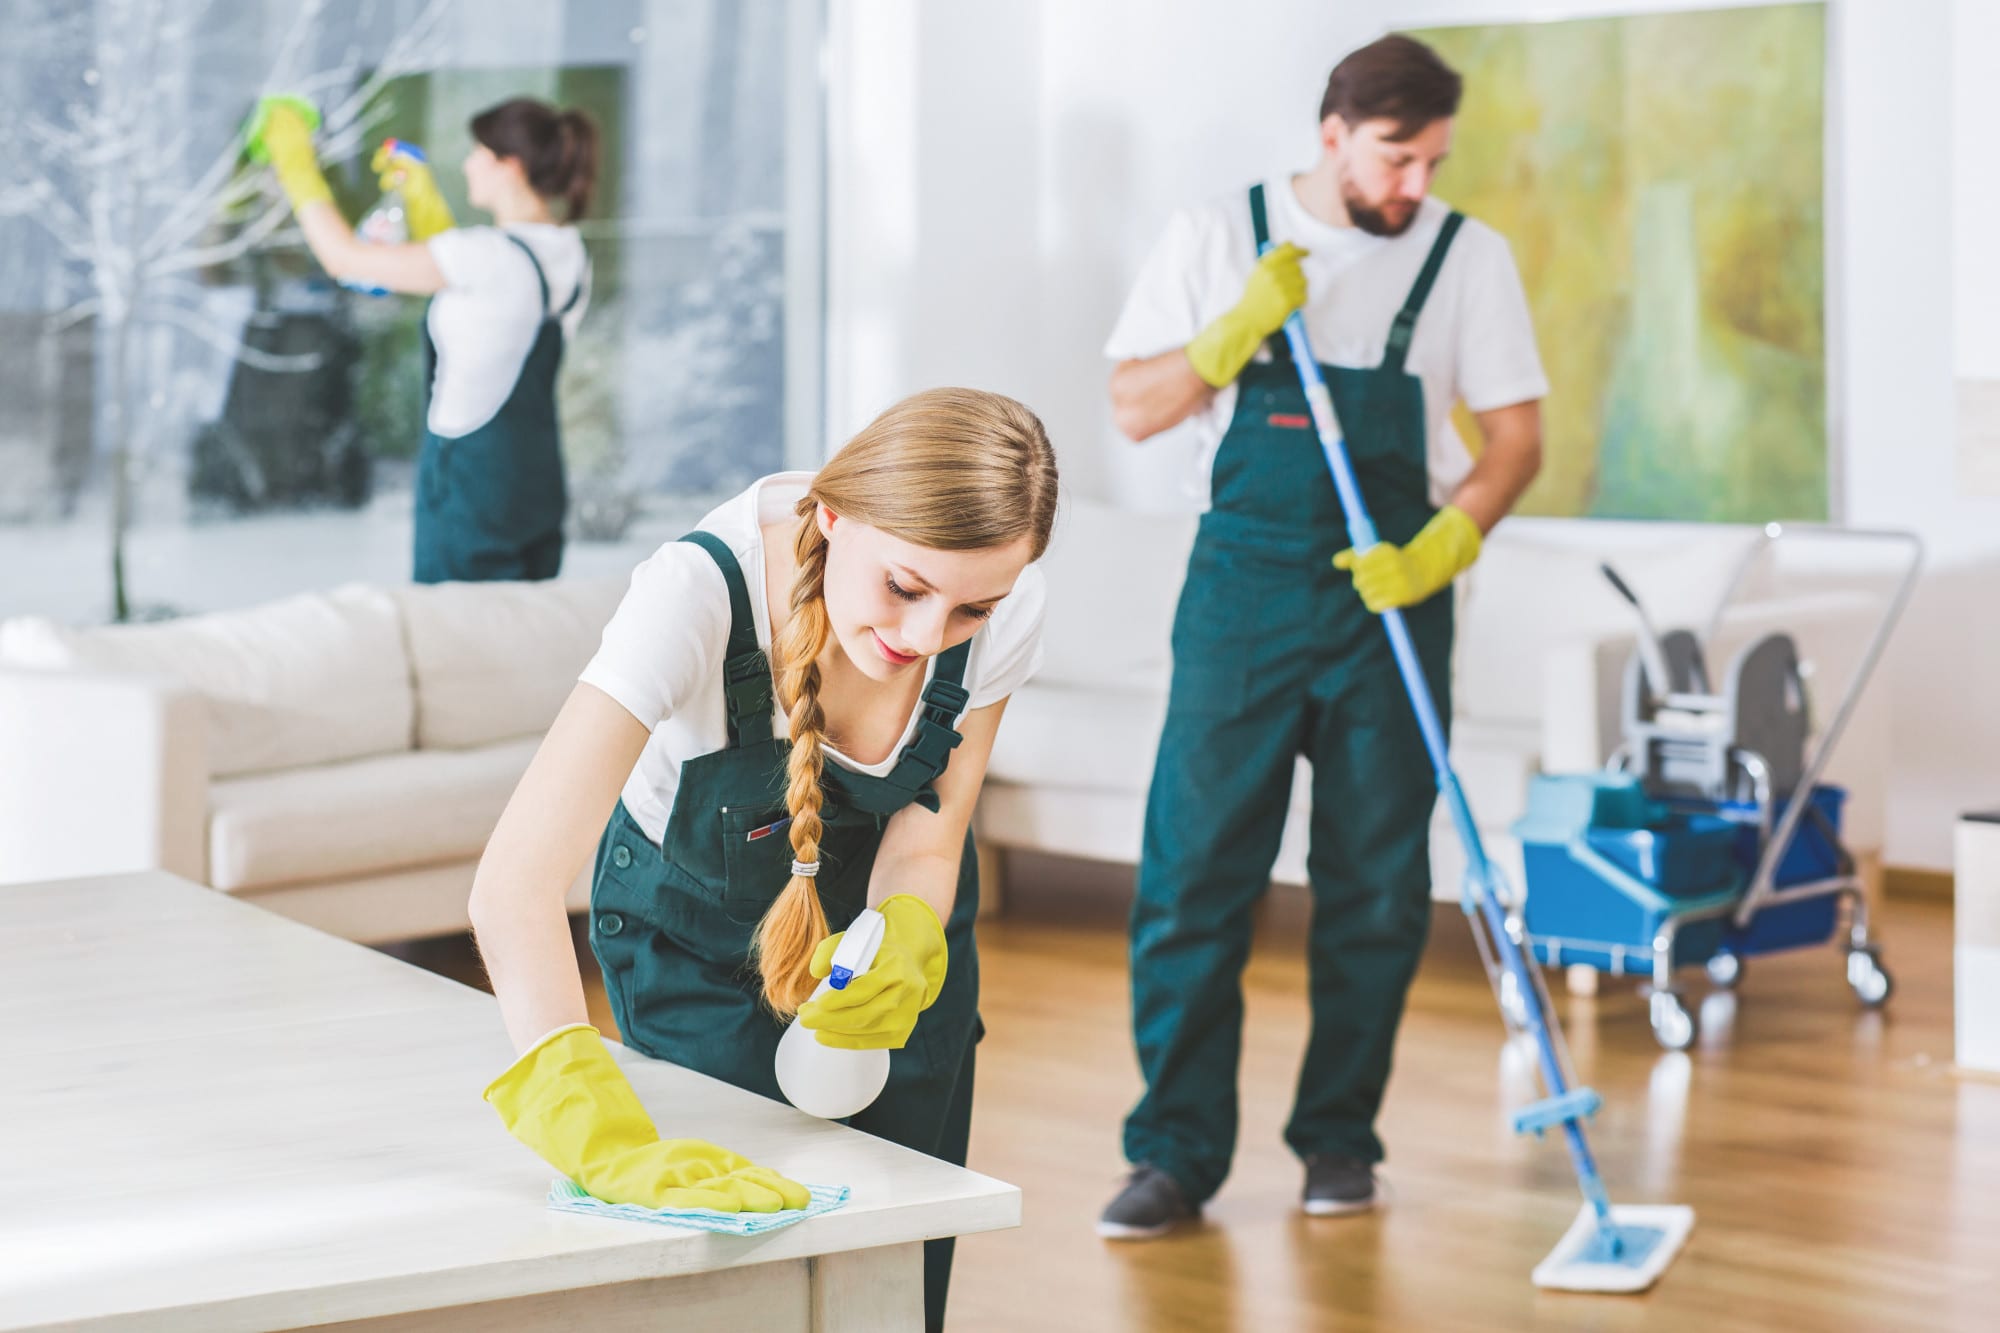 Top 4 Reasons Why You Should Hire an Office Cleaning Service